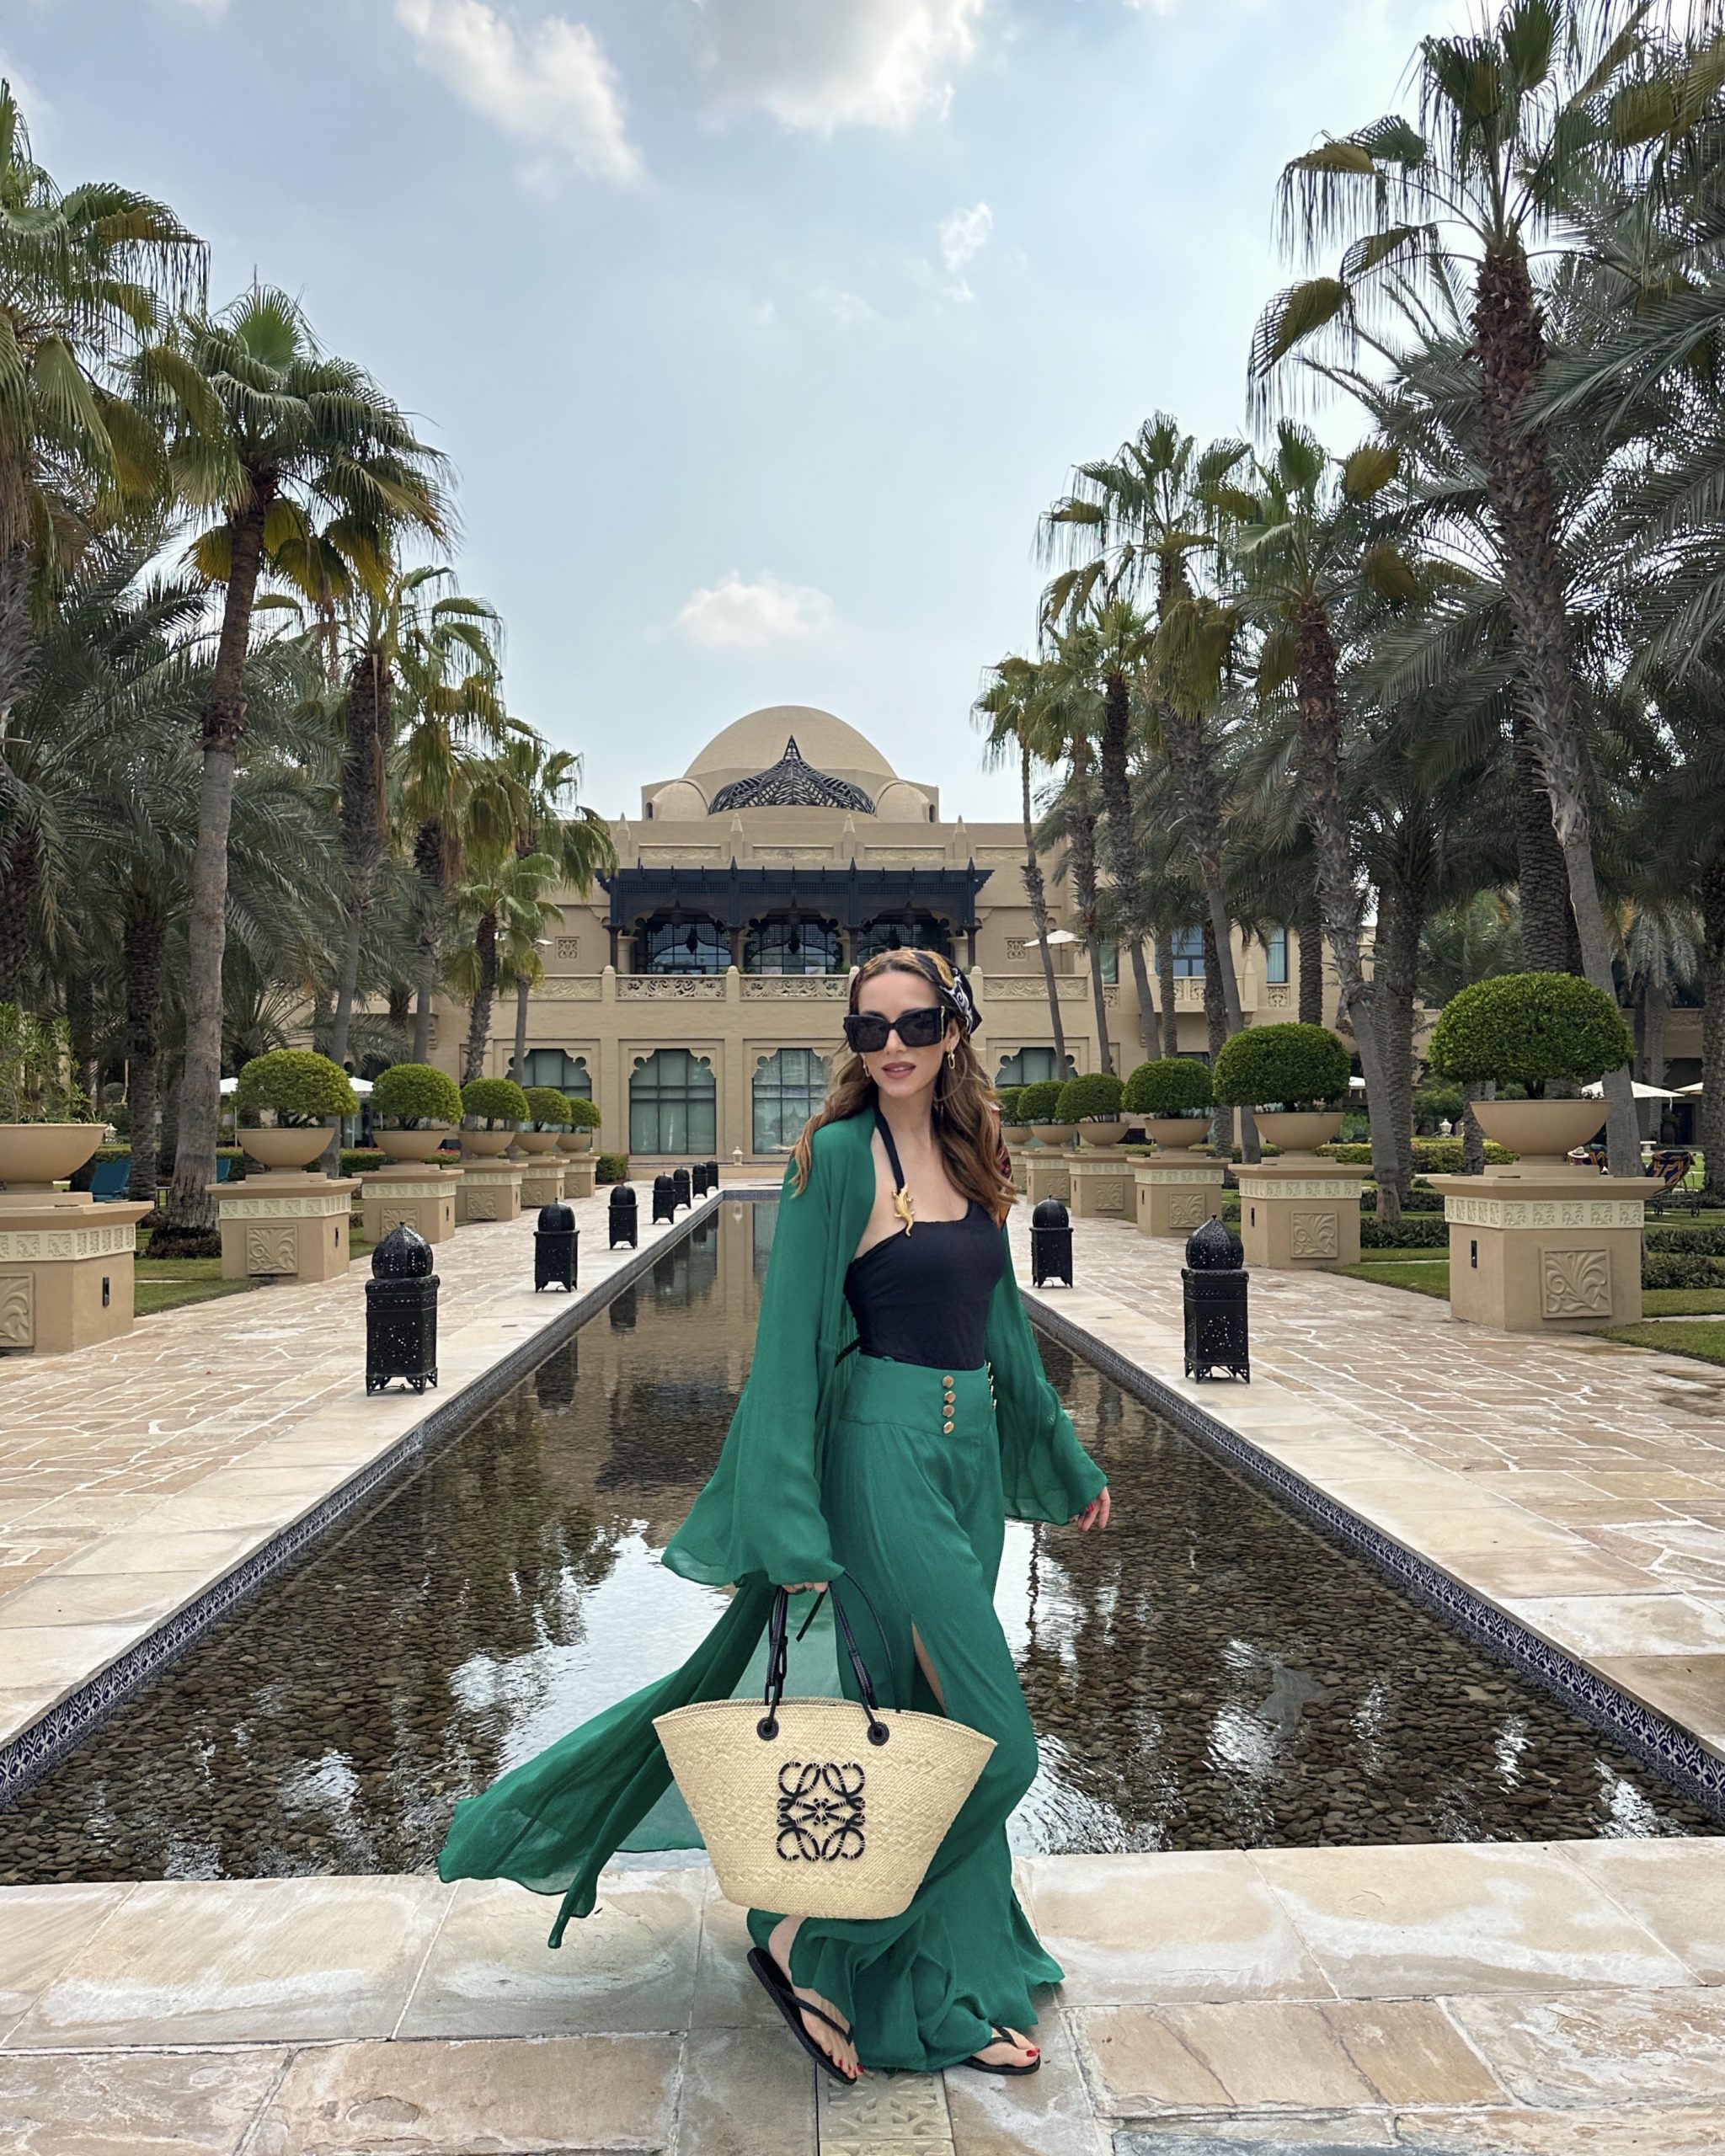 An Extravagant Arabian Adventure with One&Only